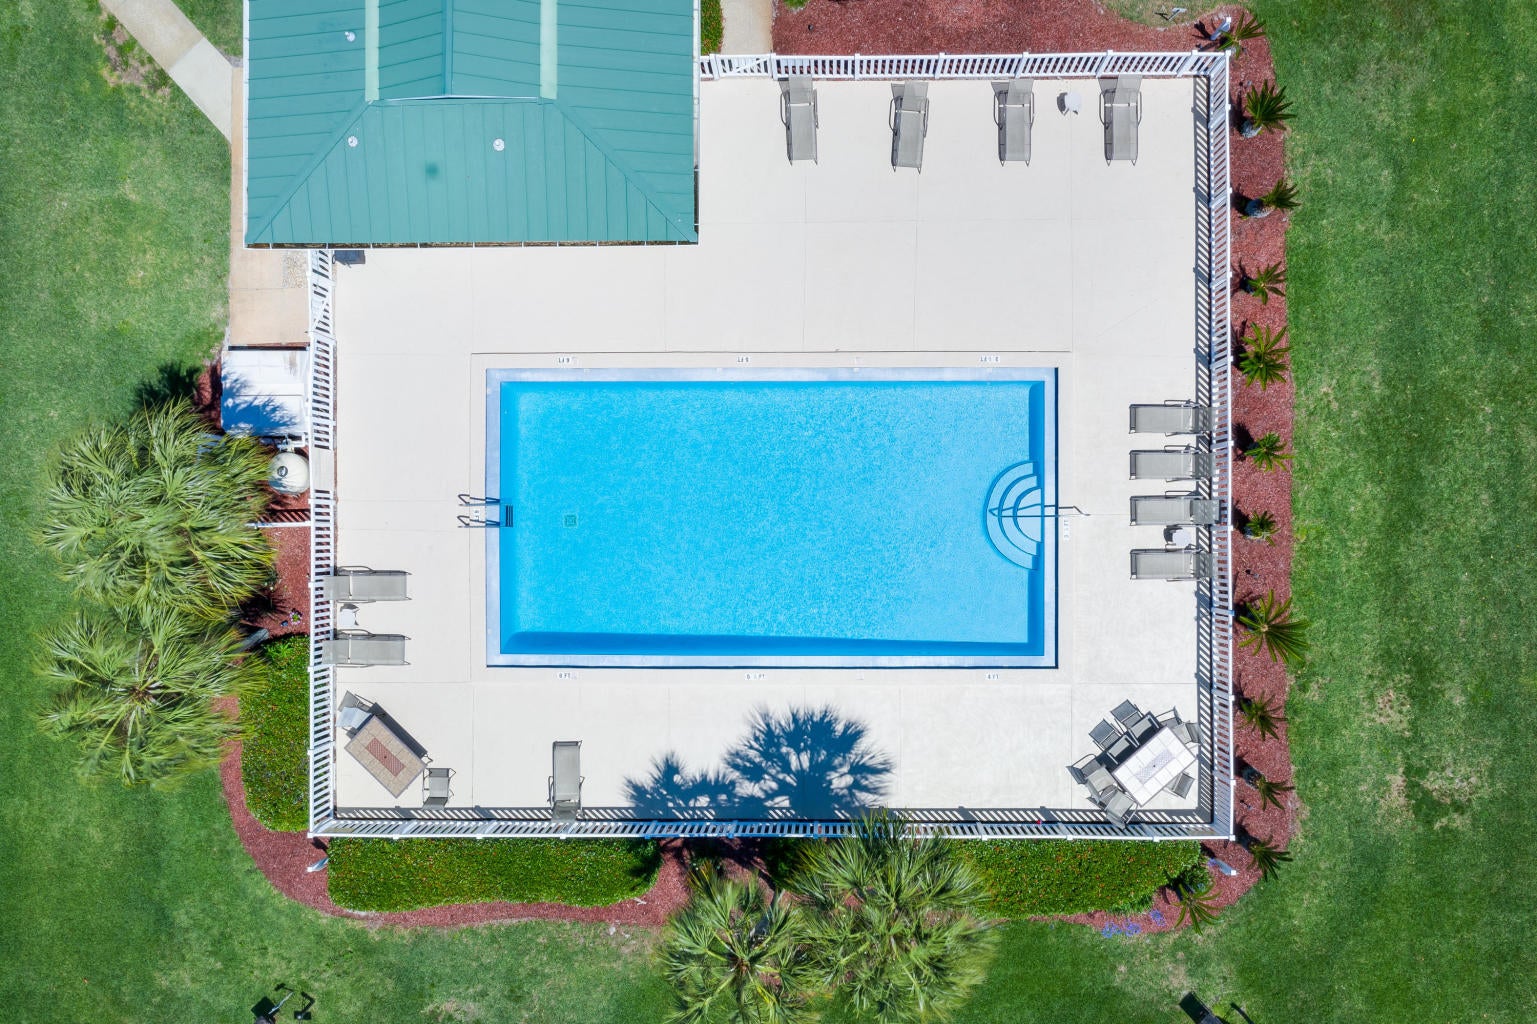 Aeriel view of the pool